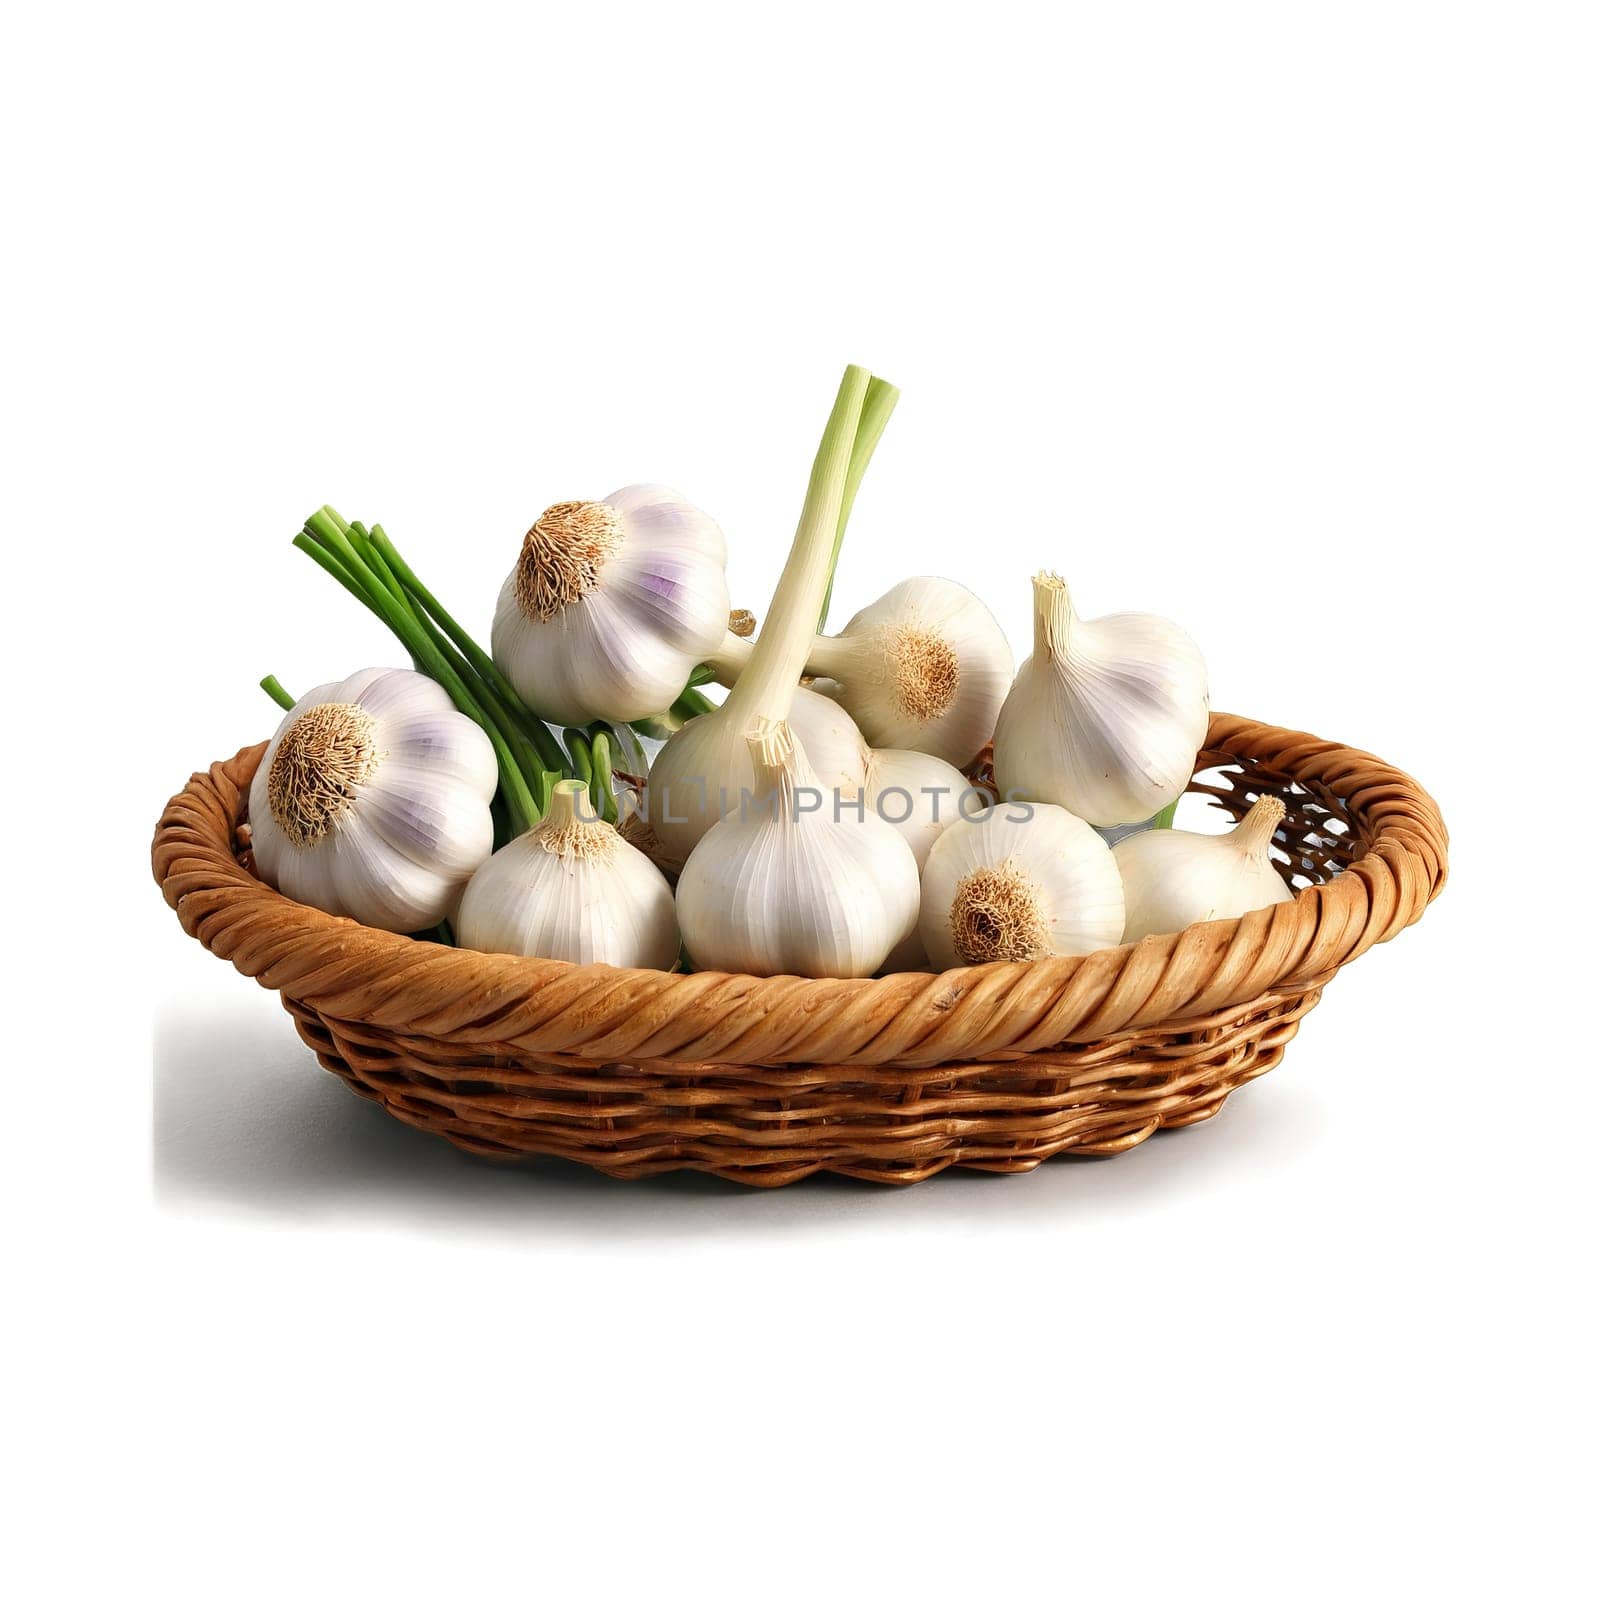 Garlic allium sativum white whole and cloved swirling around antique wicker basket misty air Food. Food isolated on transparent background.